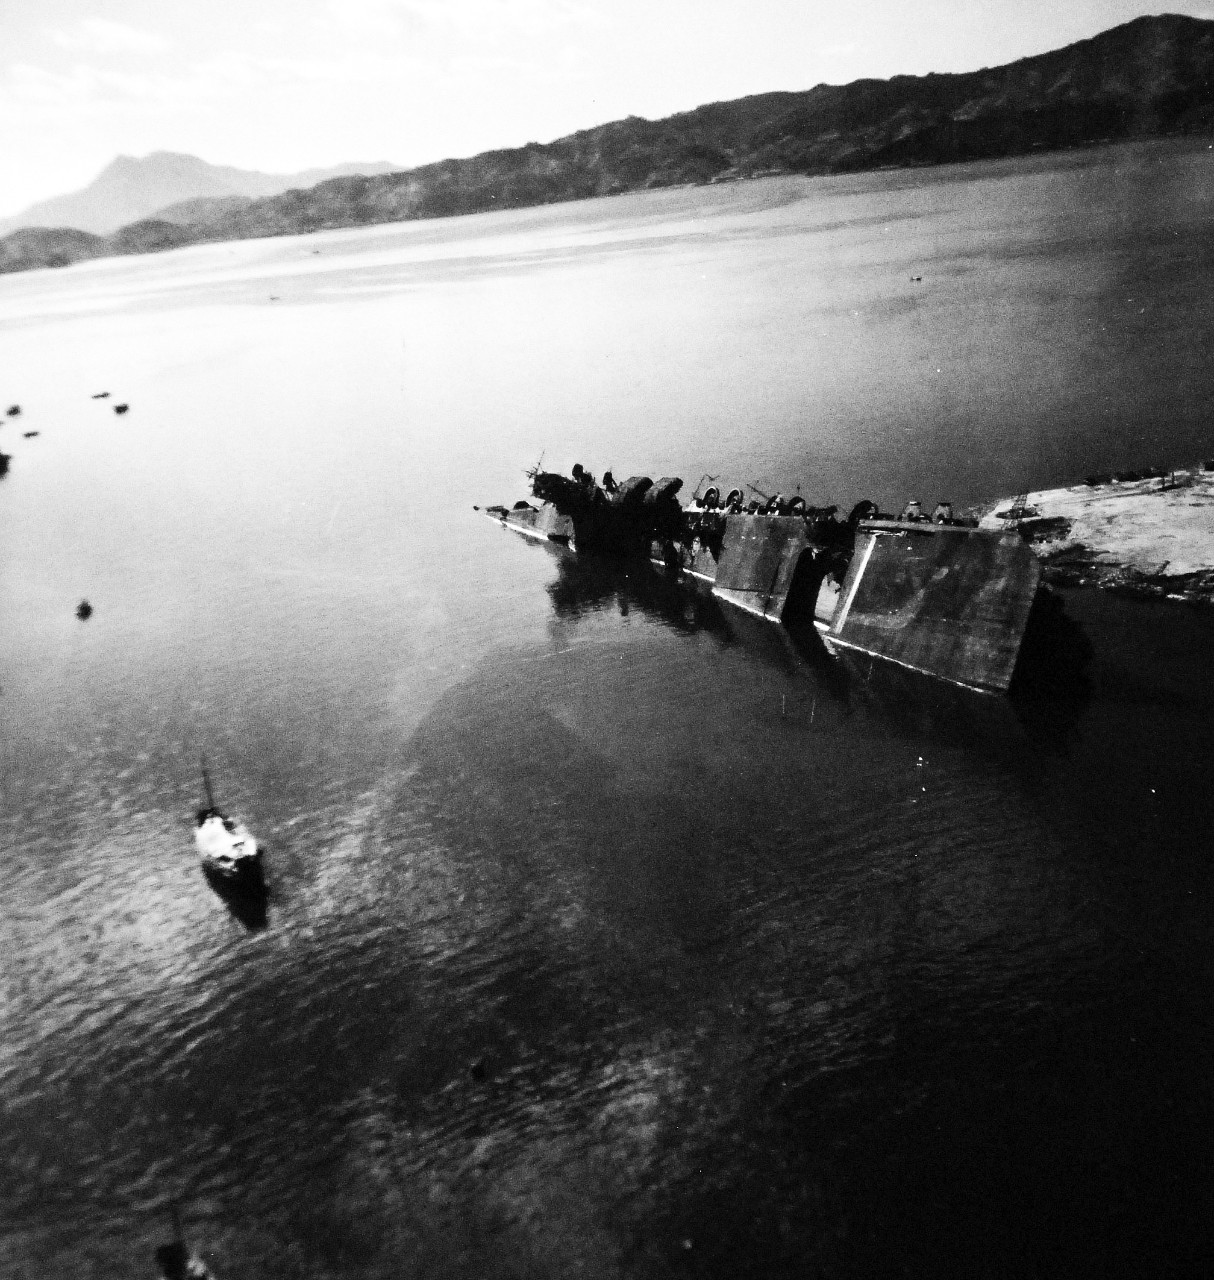 80-G-349906:  Japanese aircraft carrier Amagi, 1945.  Damaged Japanese ships in Kure Harbor, Japan.  Shown is Japanese aircraft carrier Amagi.   Photographedby USS St. George (AV-16) aircraft,  October 14, 1945.    Official U.S. Navy Photograph, now in the collections of the National Archives.   (2014/6/19). 